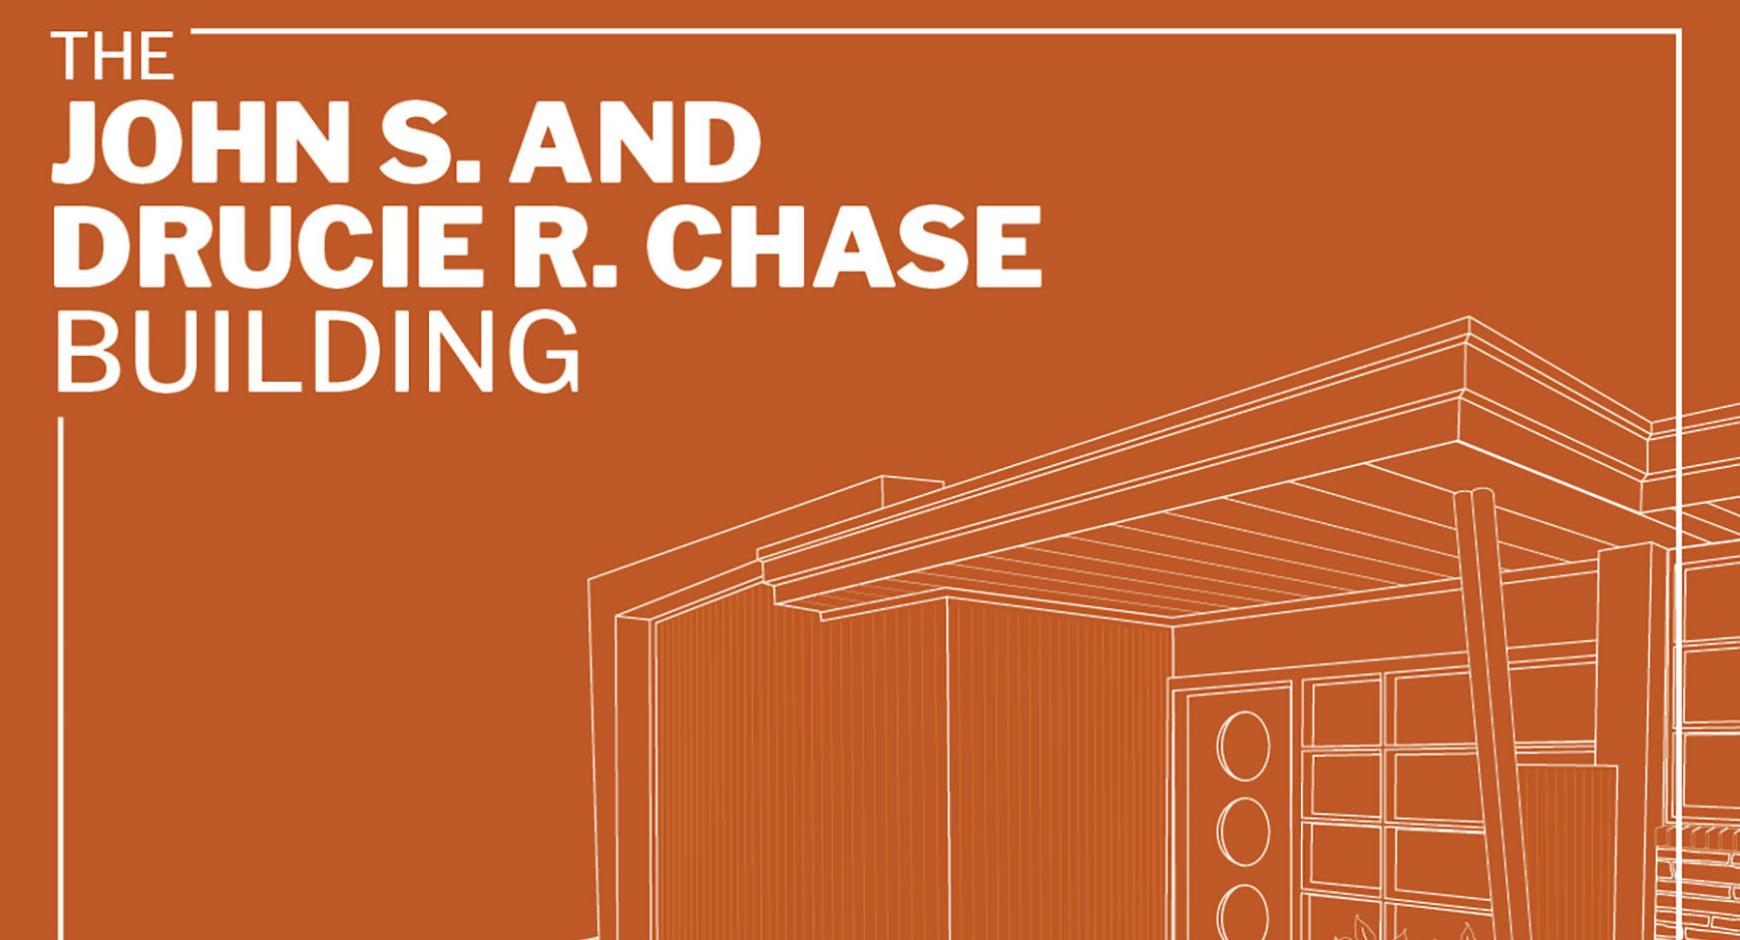 Image is a chase archive graphic that states "The John S. and Drucie R. Chase Building.